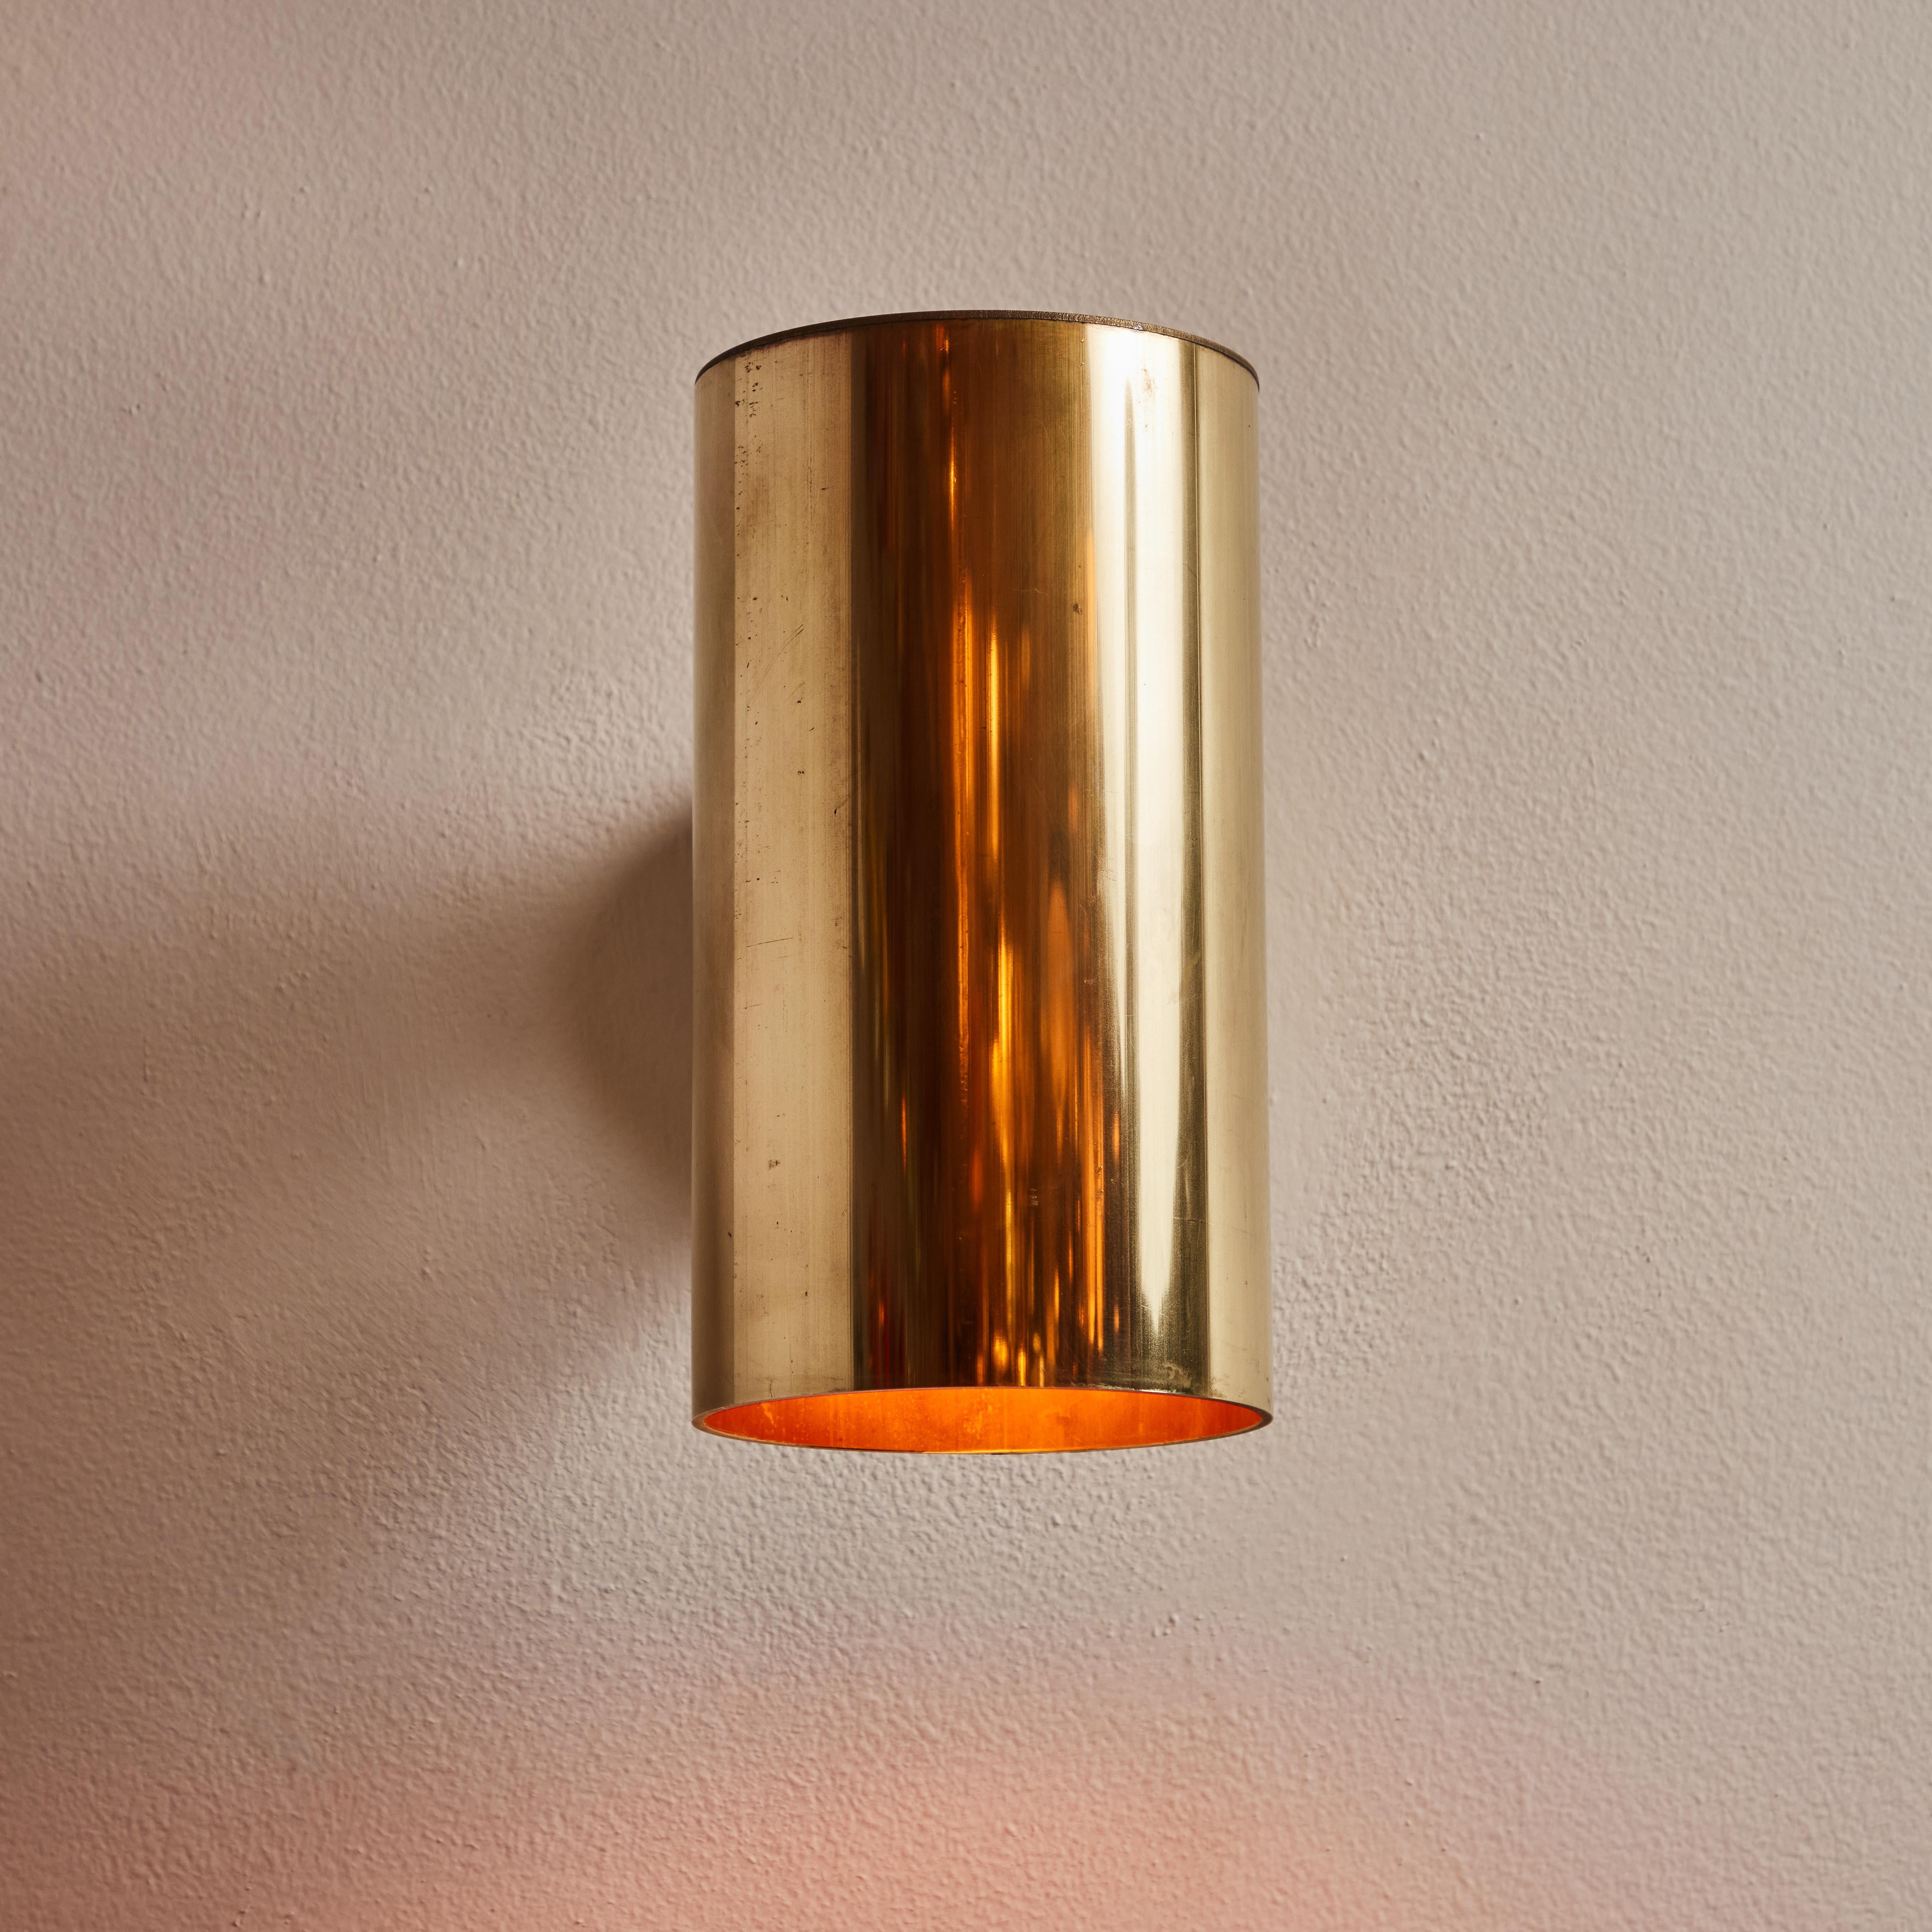 Hans-Agne Jakobsson C 627/110 'Rulle' raw brass outdoor sconce. An exclusive made for U.S. and UL listed authorized re-edition of the classic Swedish design executed in raw unlacquered and unpolished brass. Suitable for both outdoor or indoor use. 